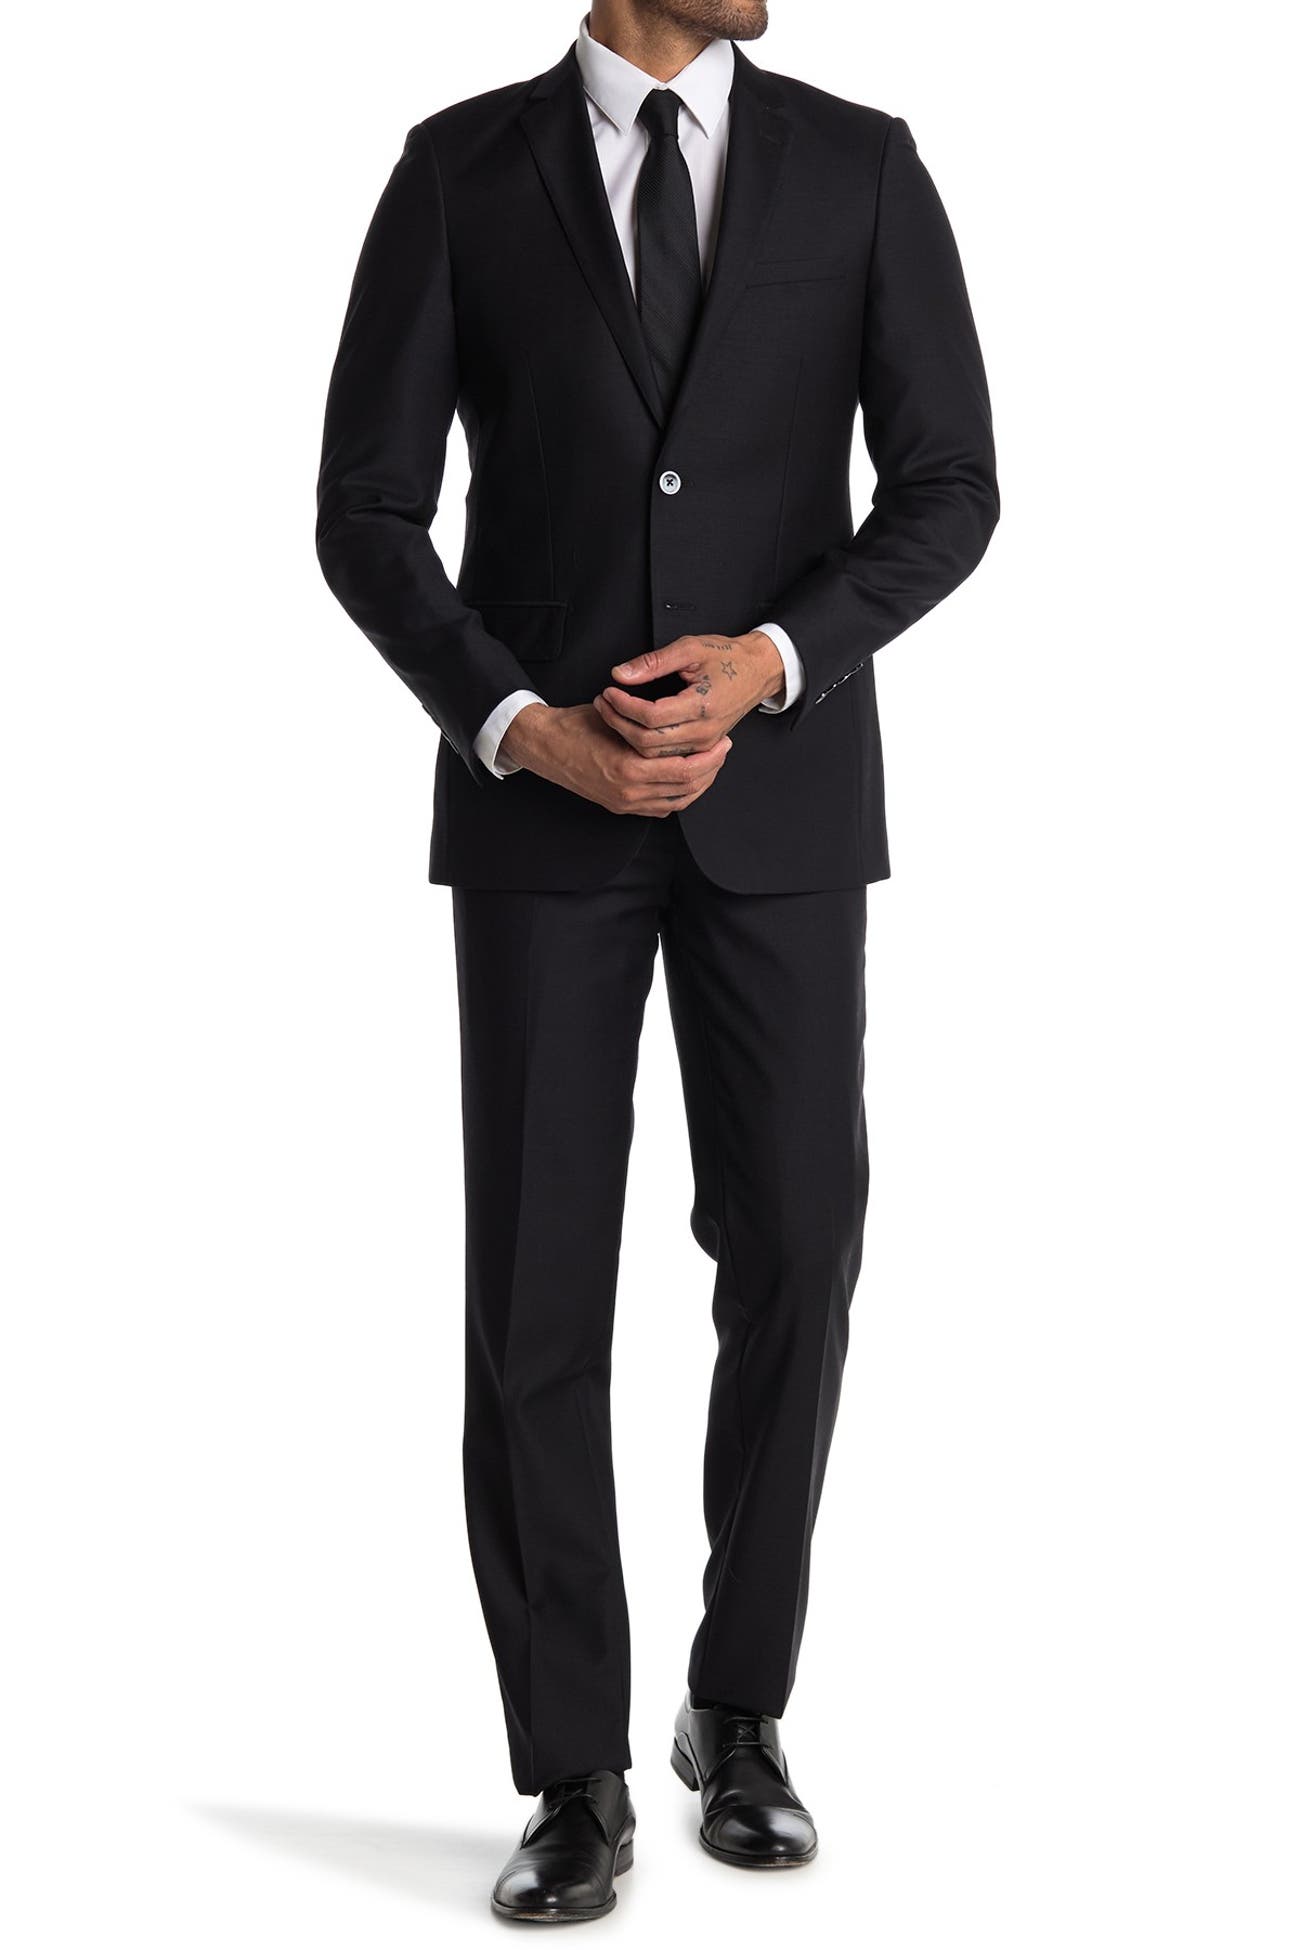 Zanetti | Solid Black Slim Fit Notch Lapel Two-Button Suit | Nordstrom Rack